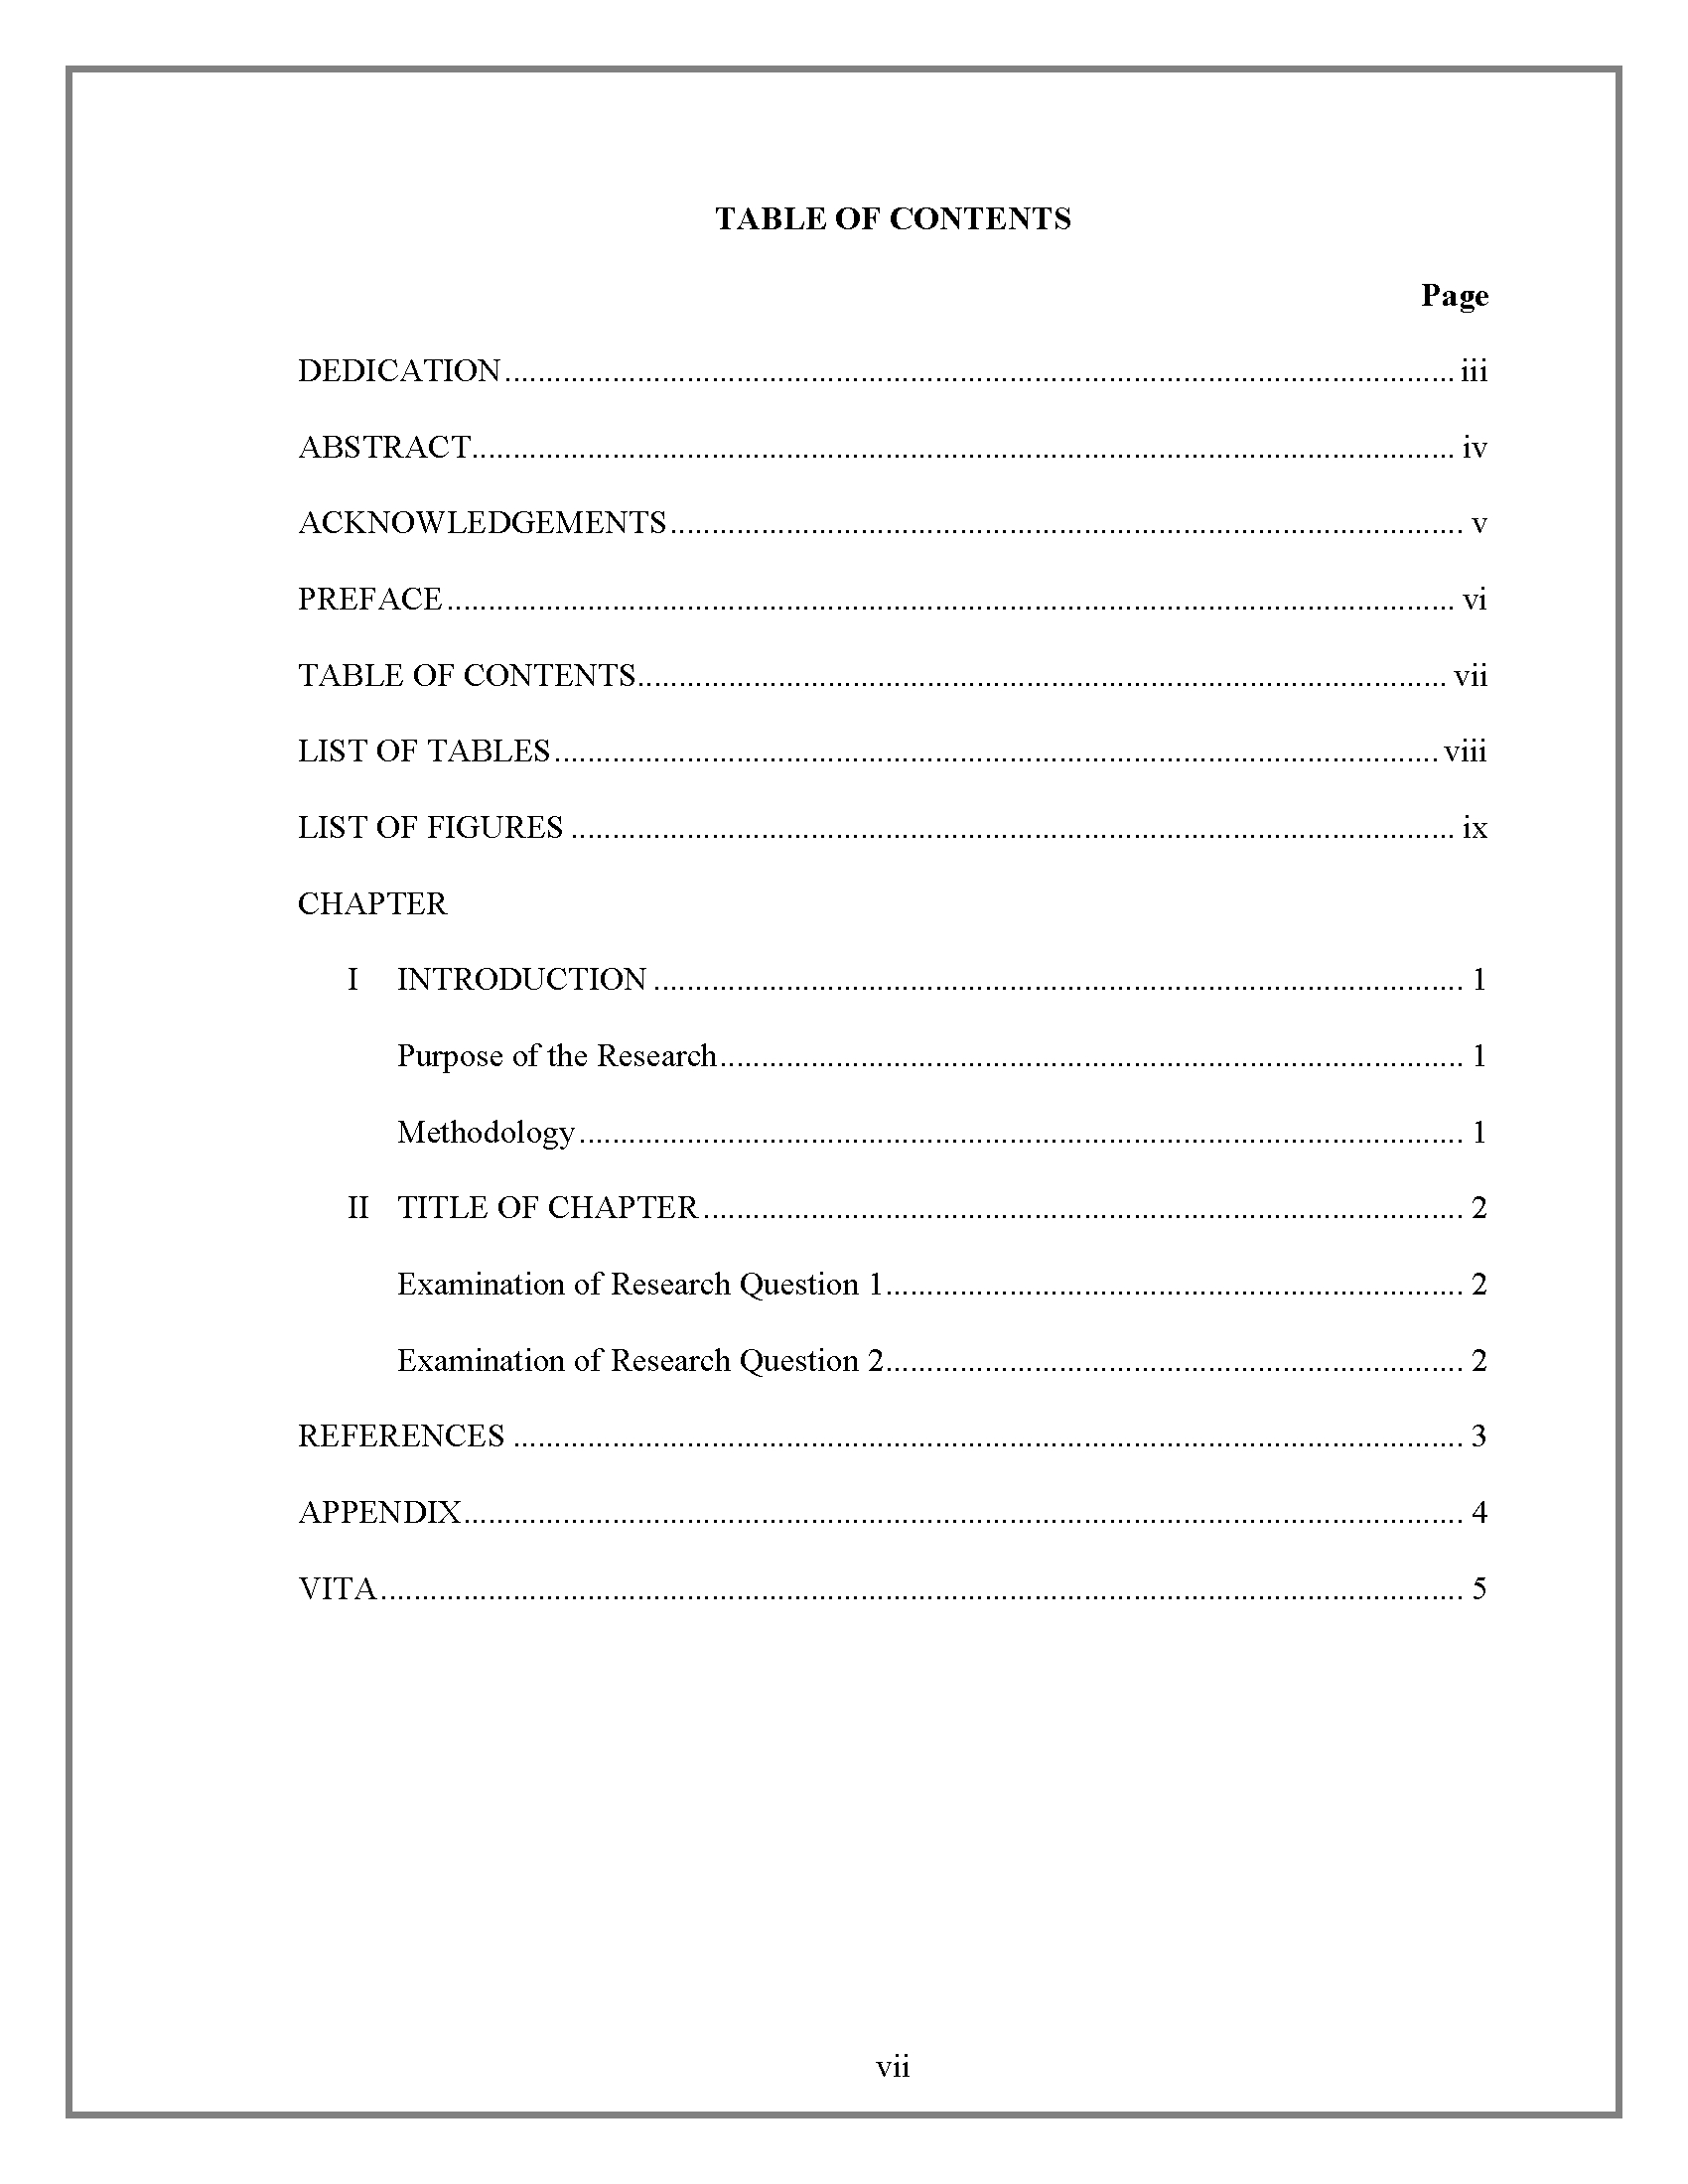 Table Of Contents - Thesis And Dissertation - Research For Report Content Page Template